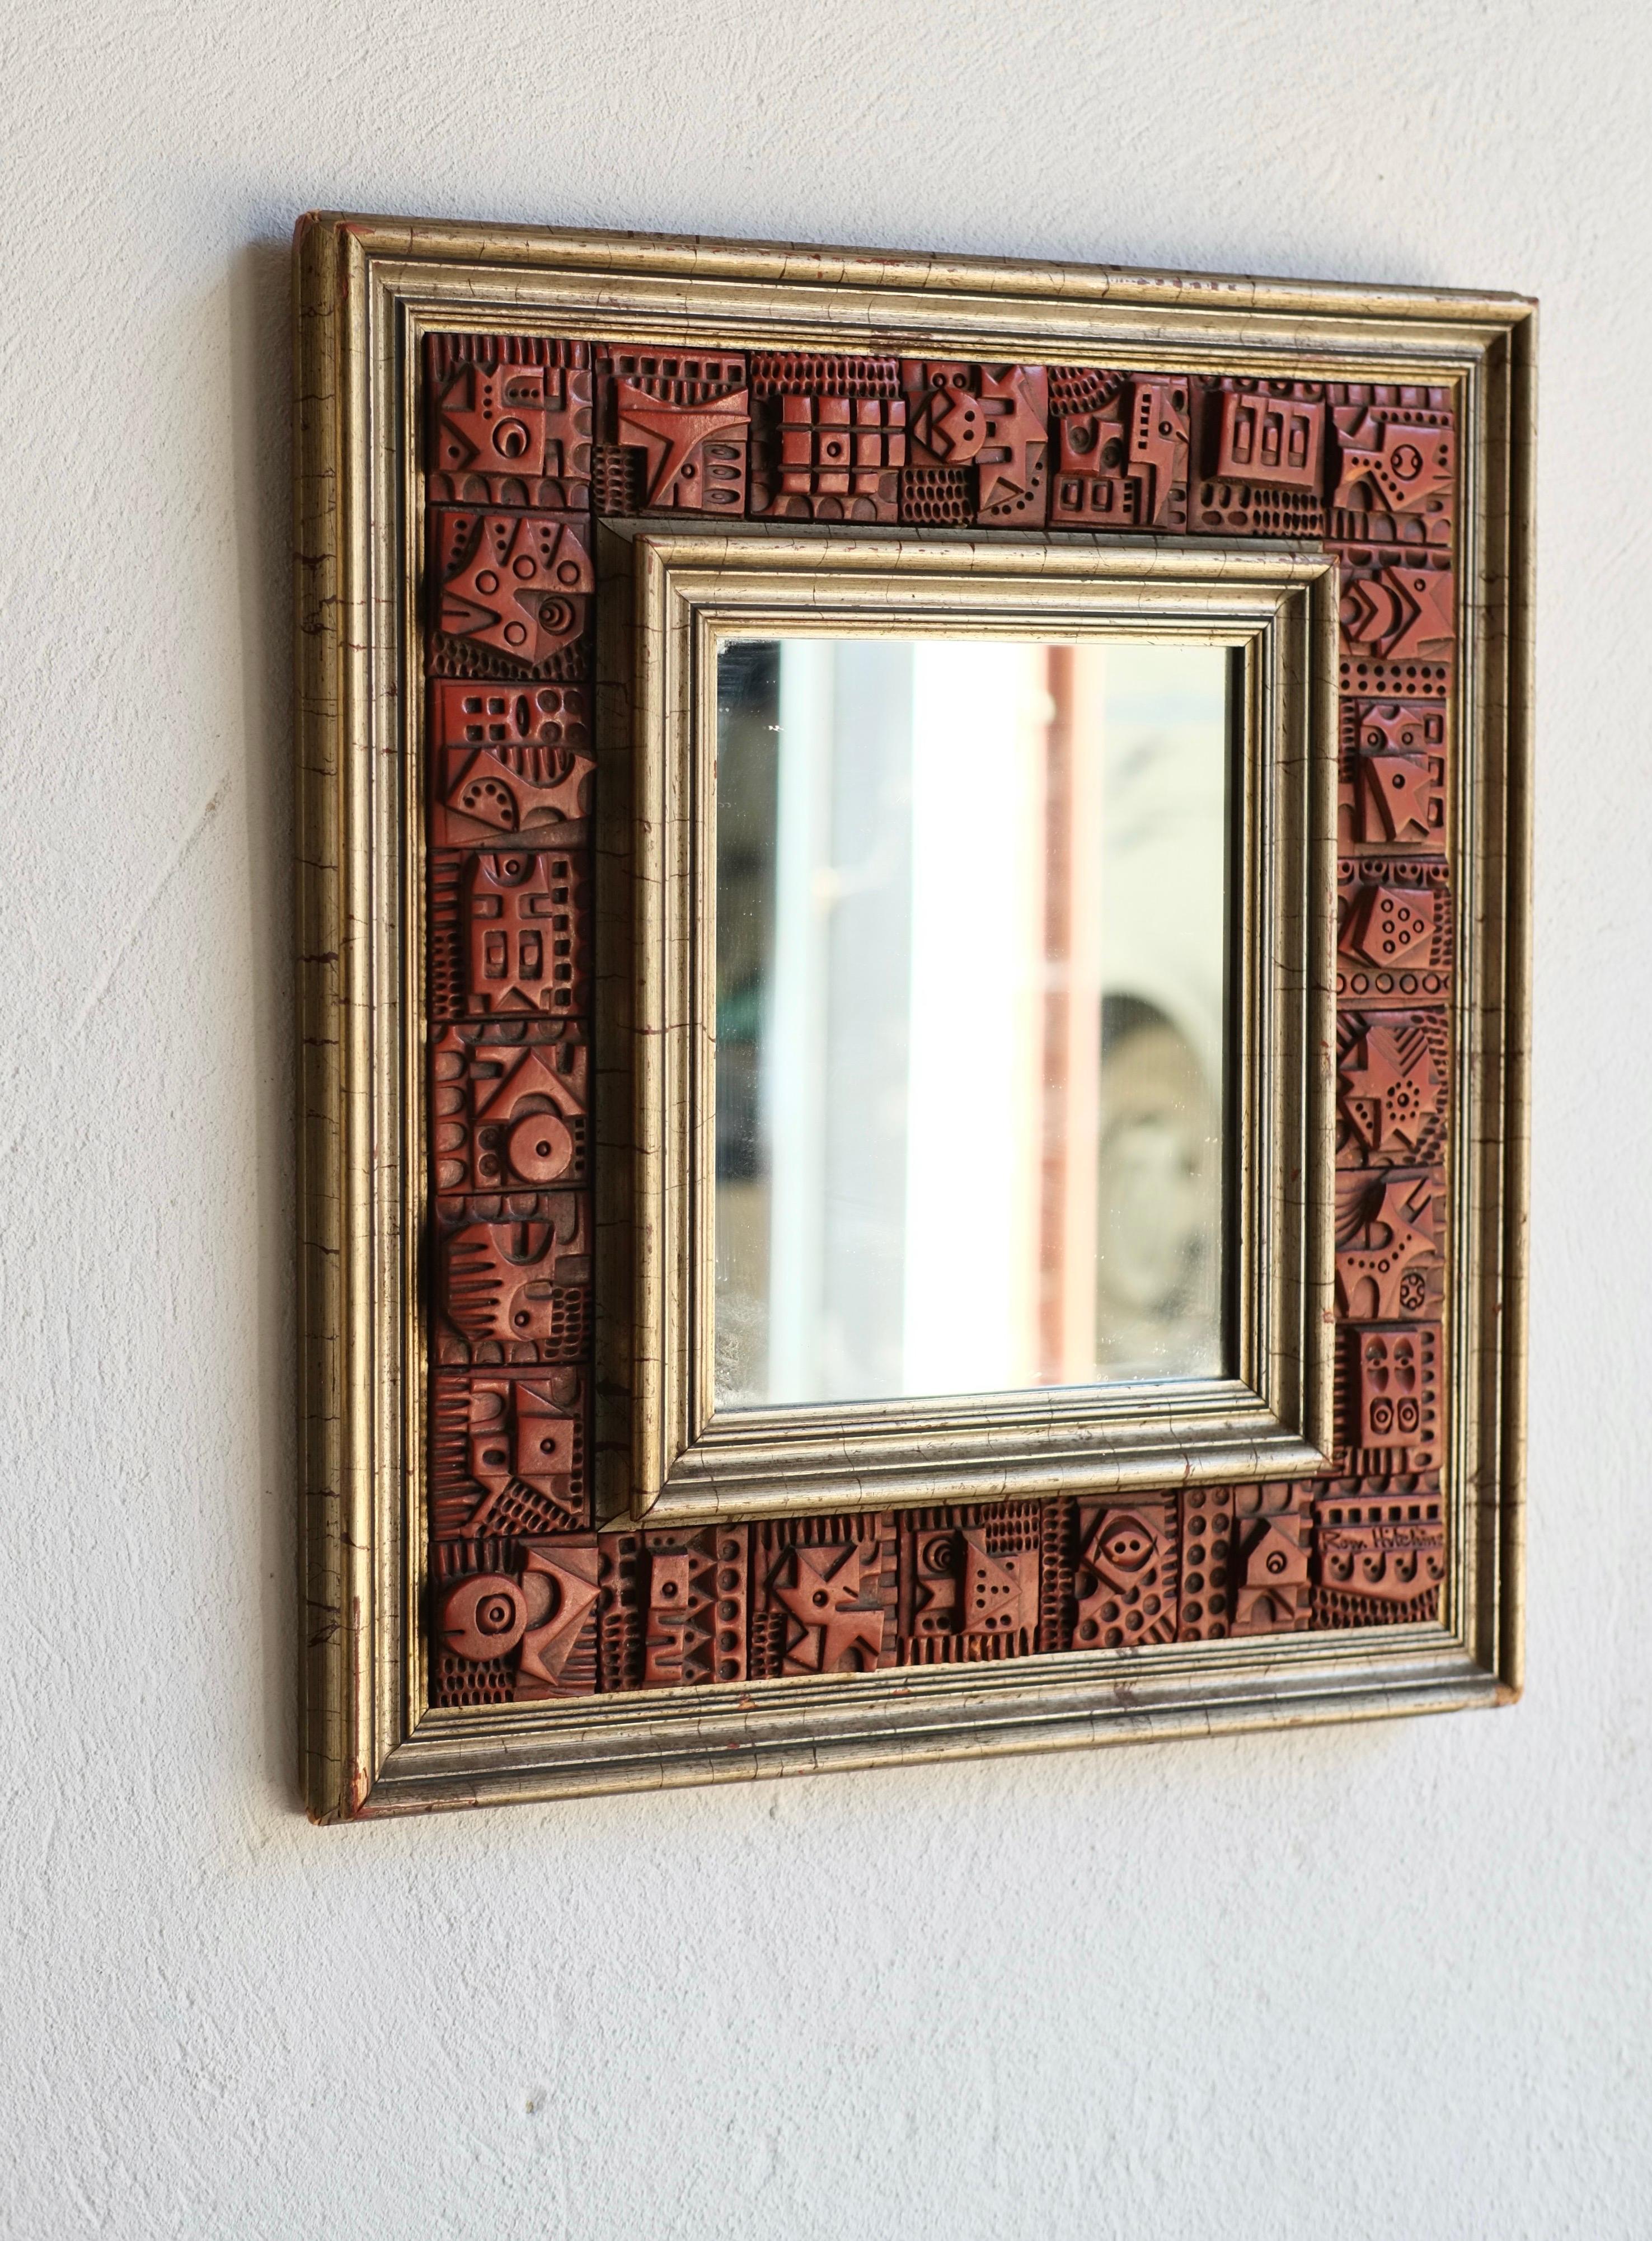 Mid-Century Modern Tiled Wall Mirror, Ron Hitchins